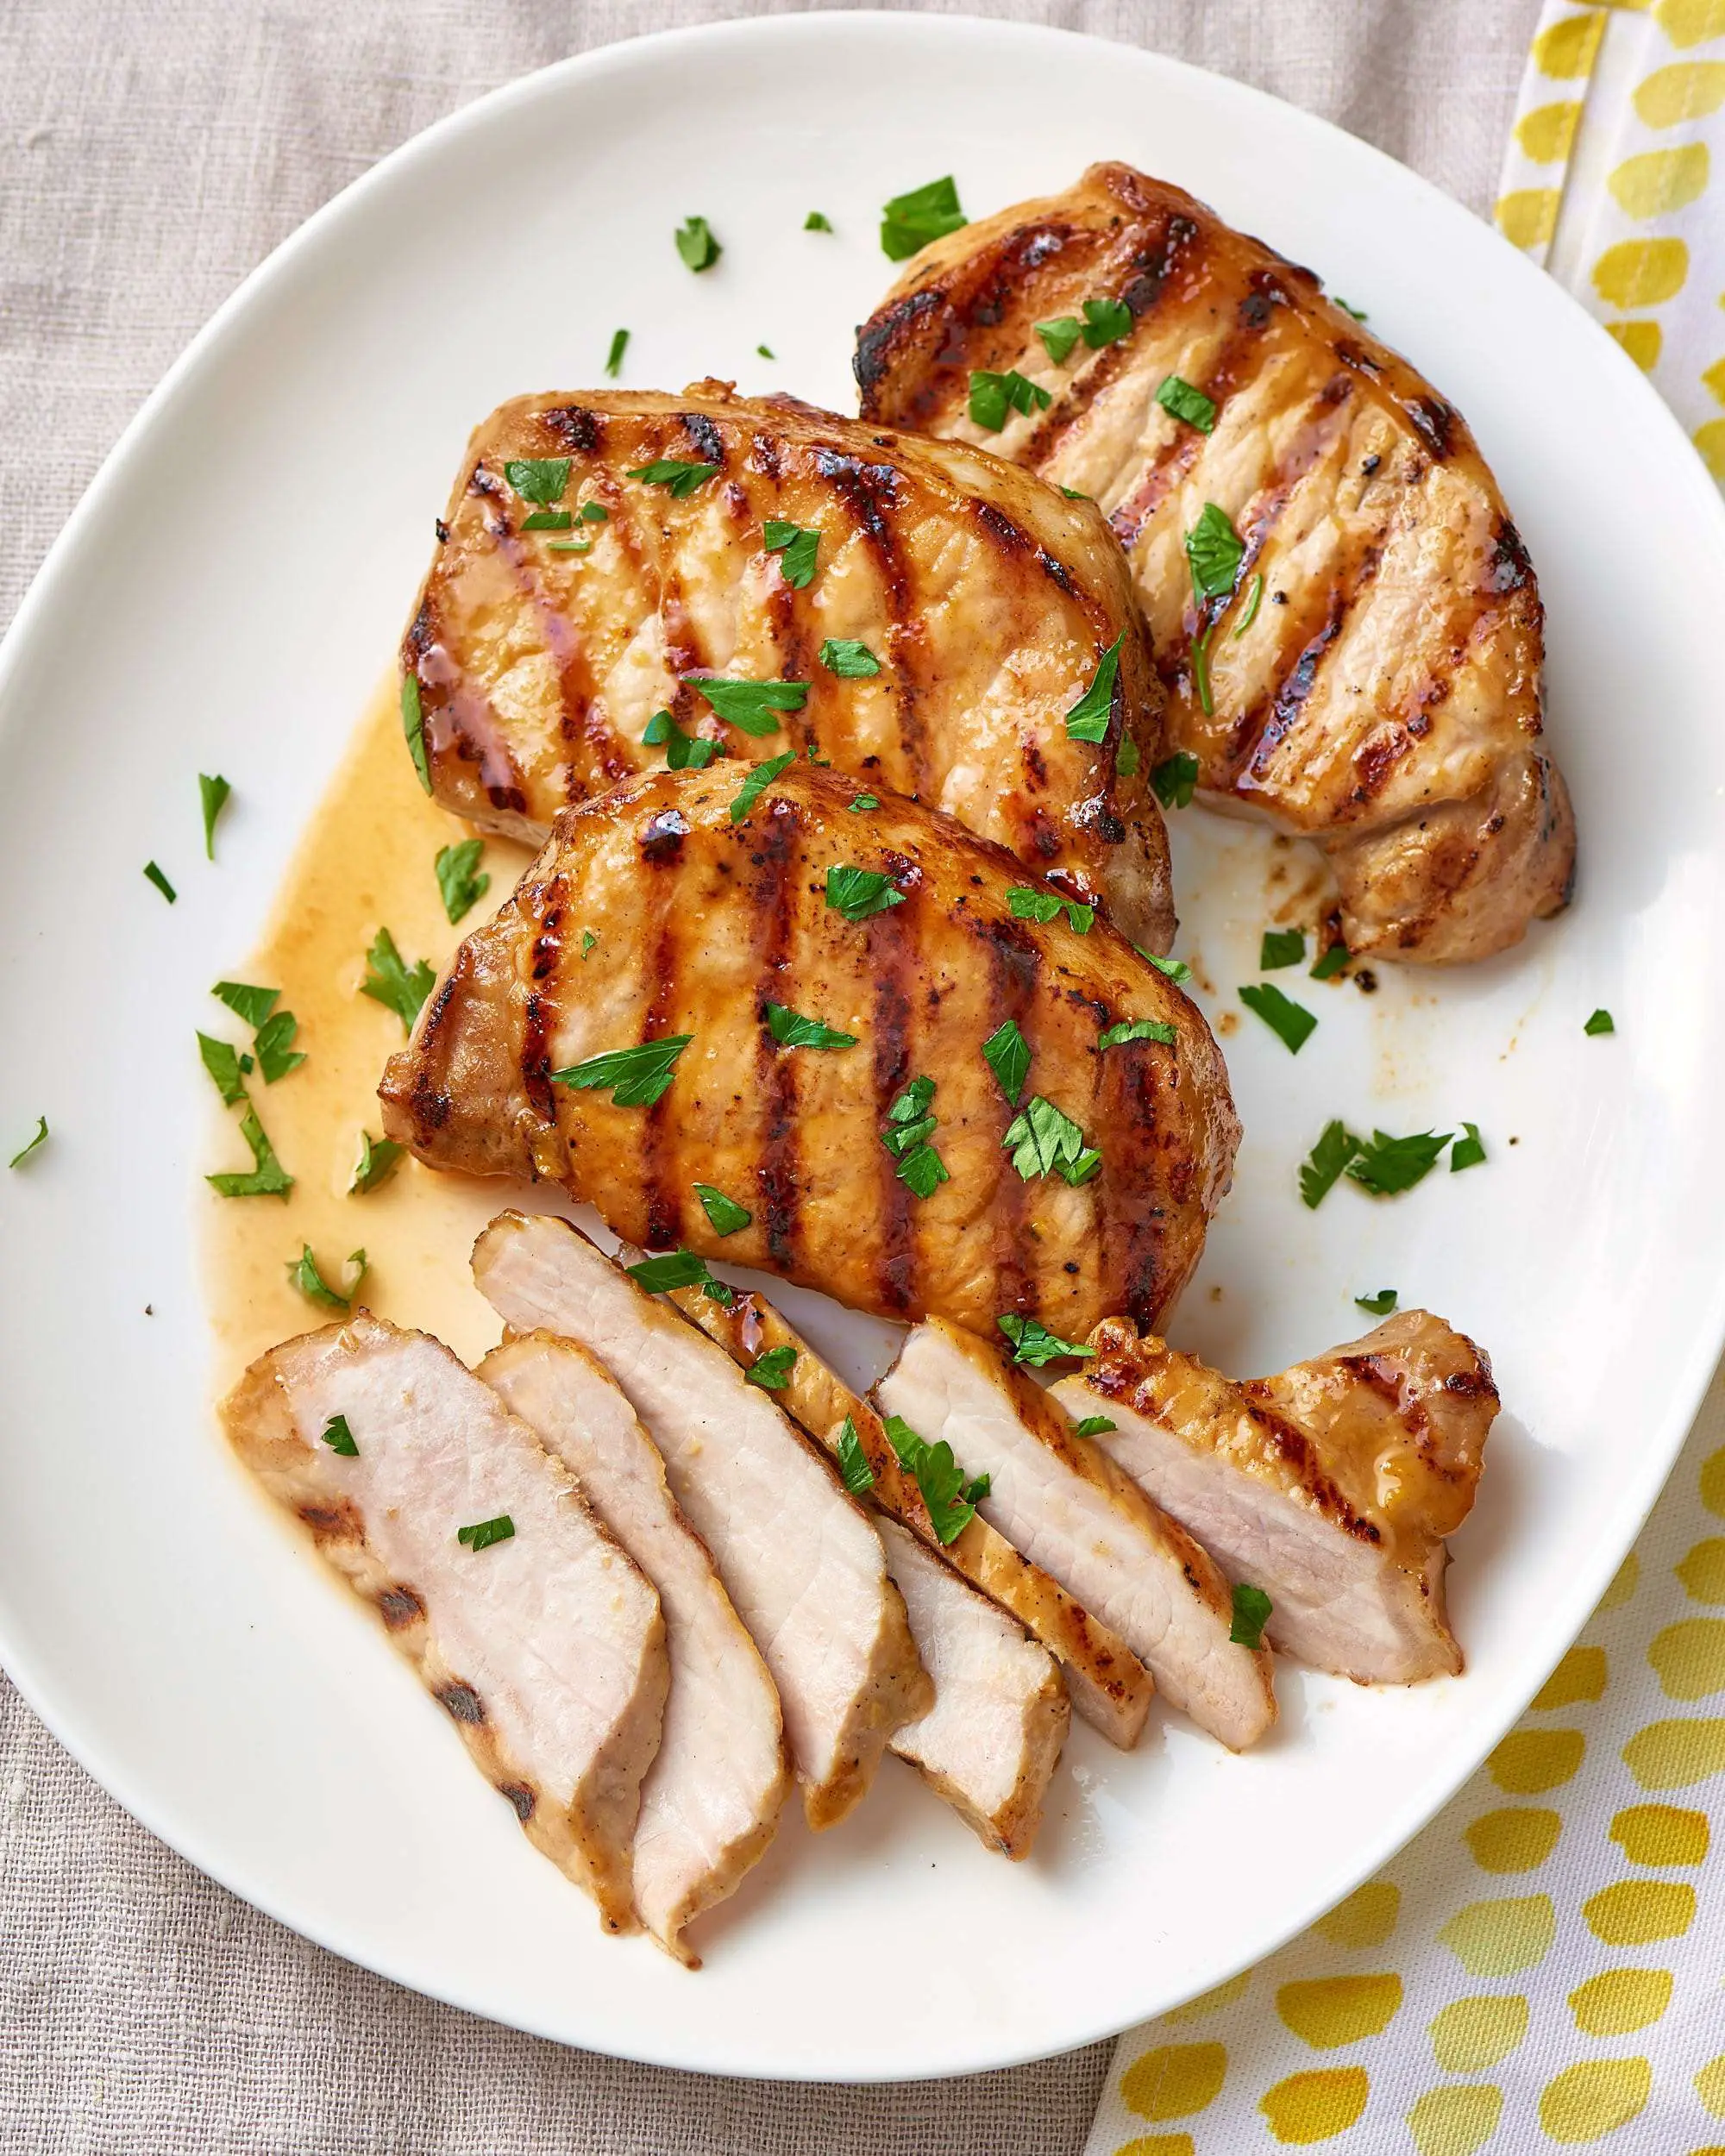 The Only Thing You Need to Know About Pork Chop ...